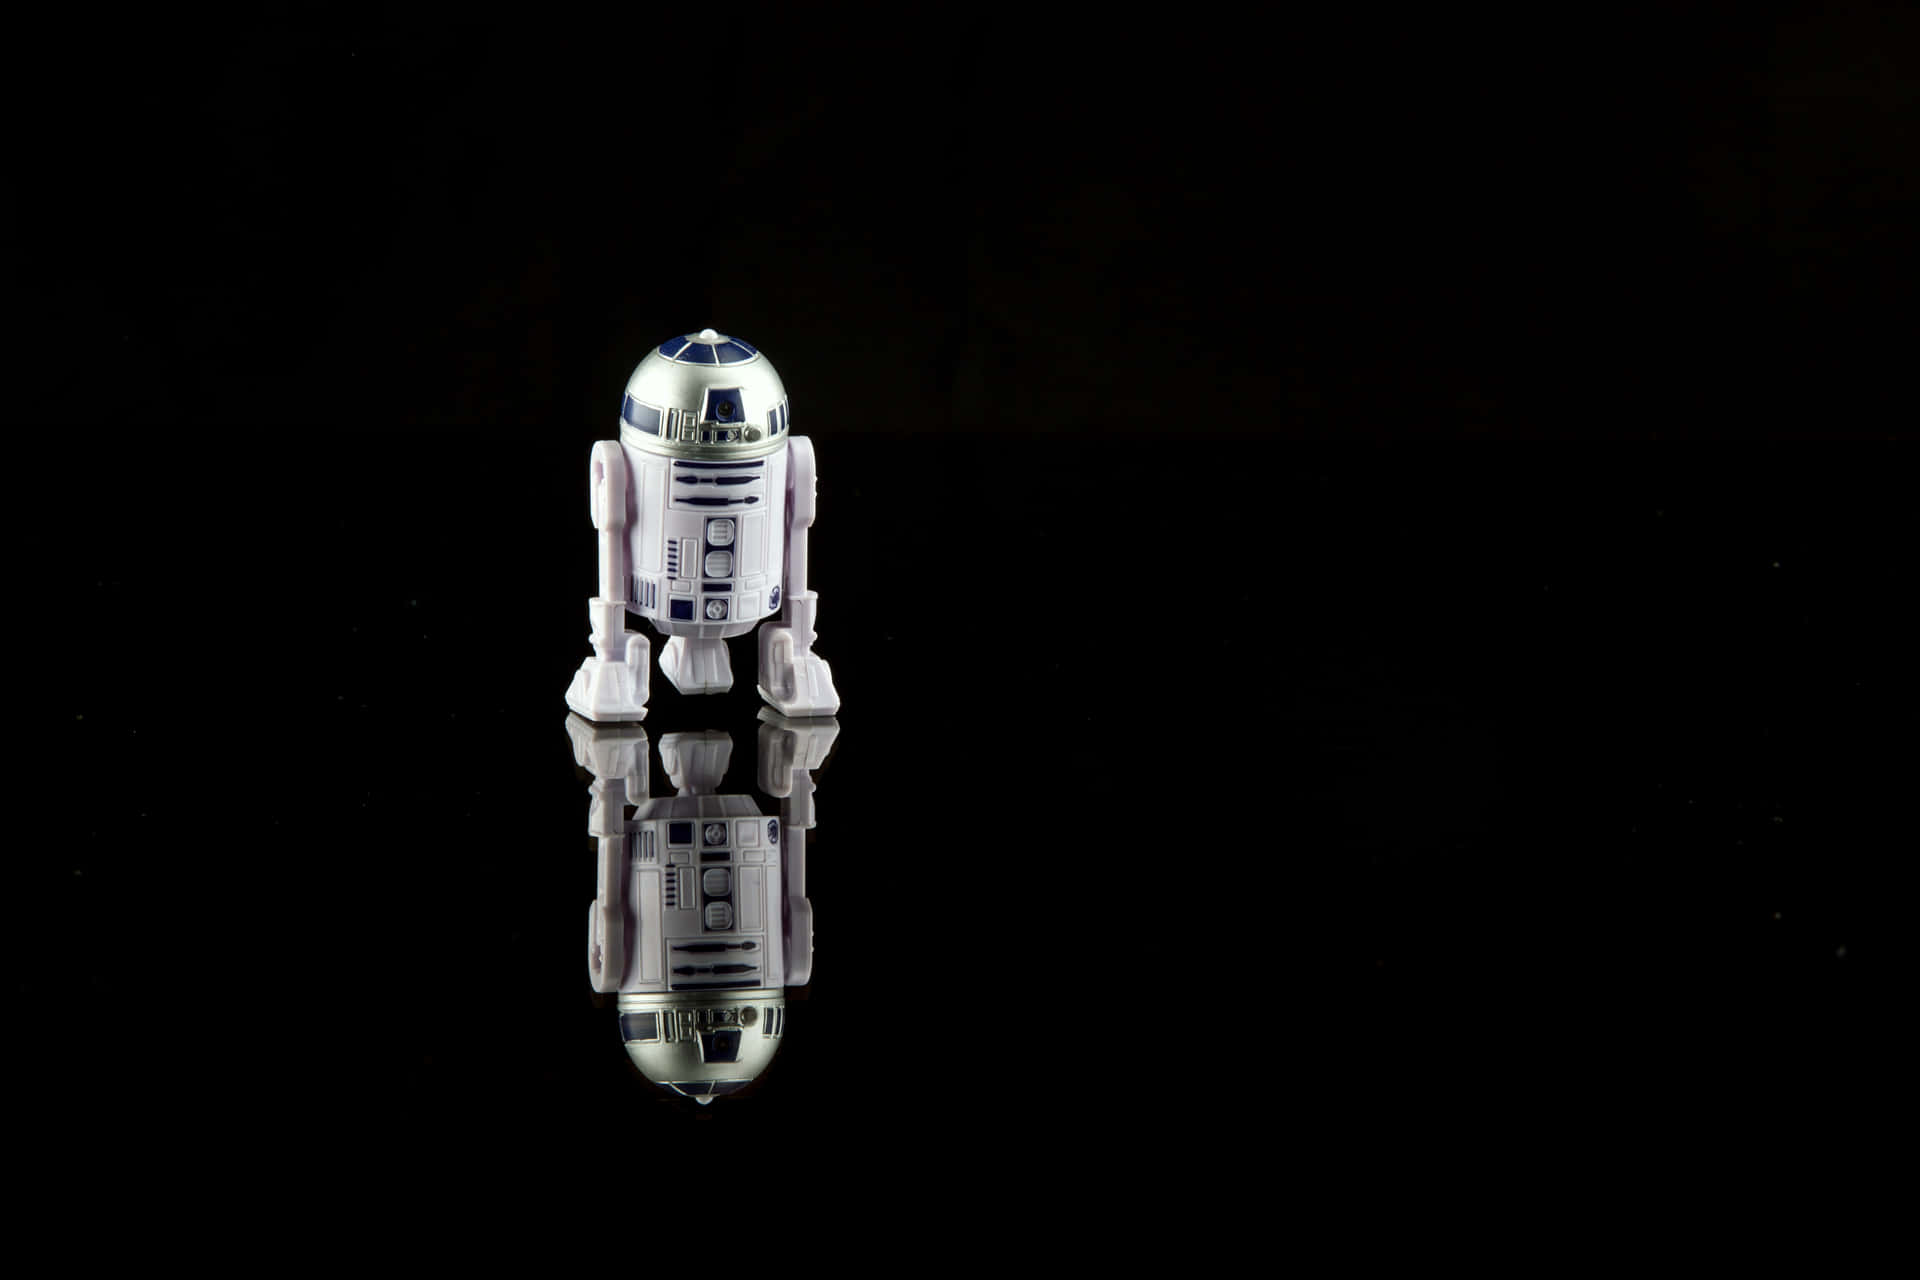 The Iconic R2D2 from Star Wars Wallpaper